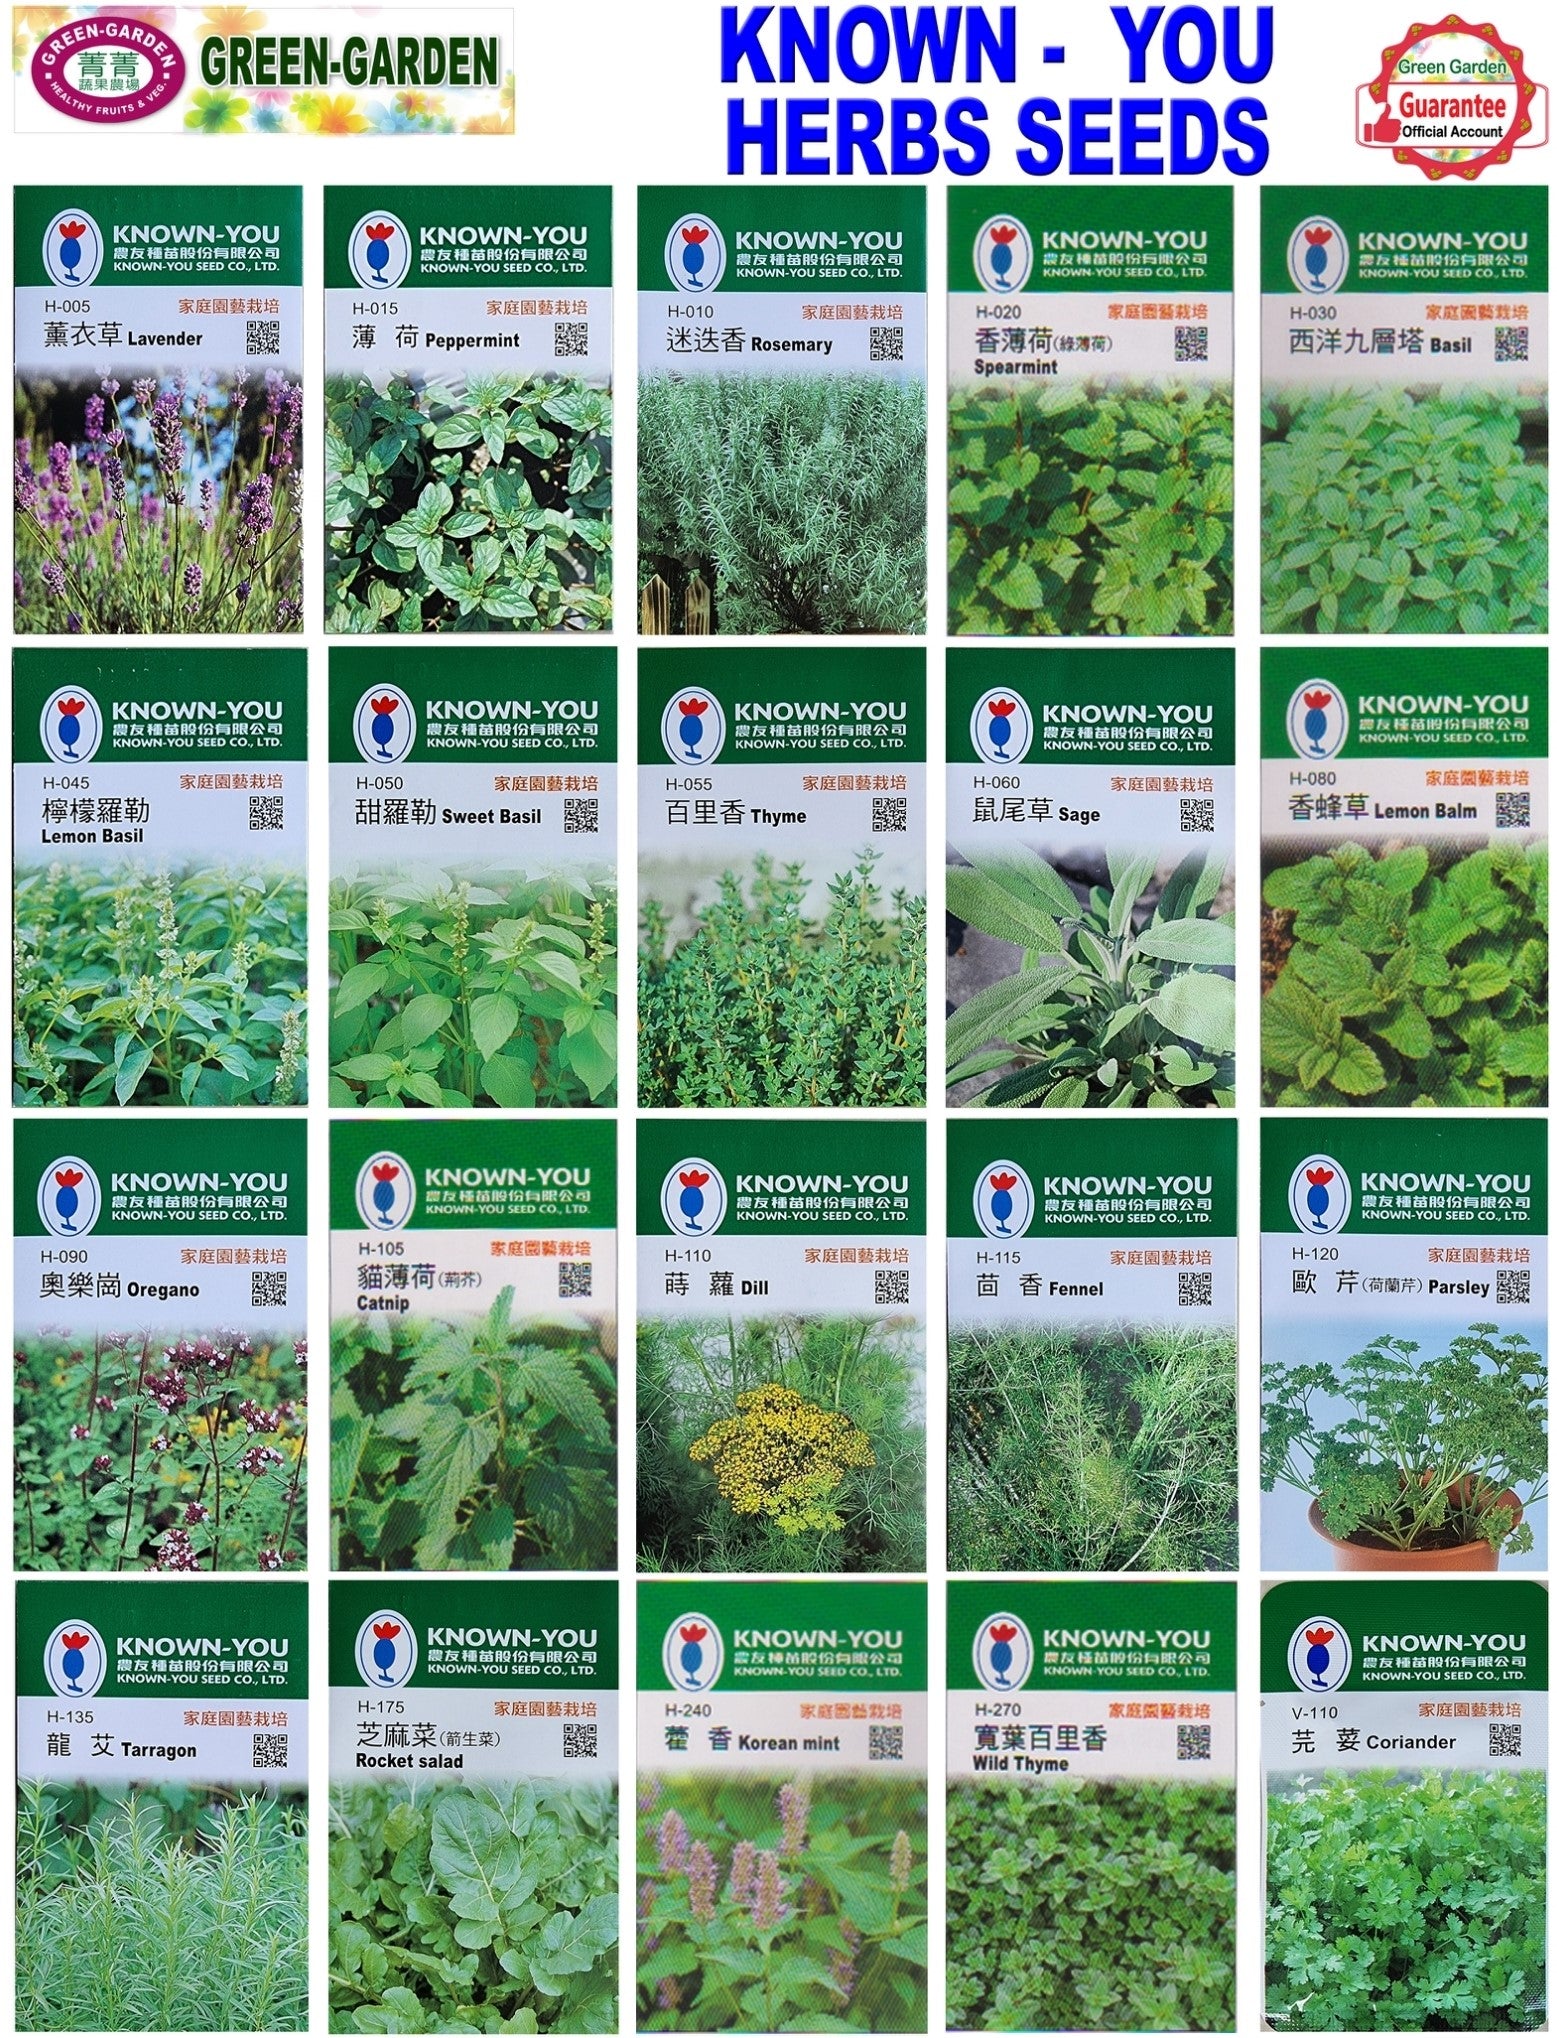 Known You Herbs Seeds (H-135 Tarragon)